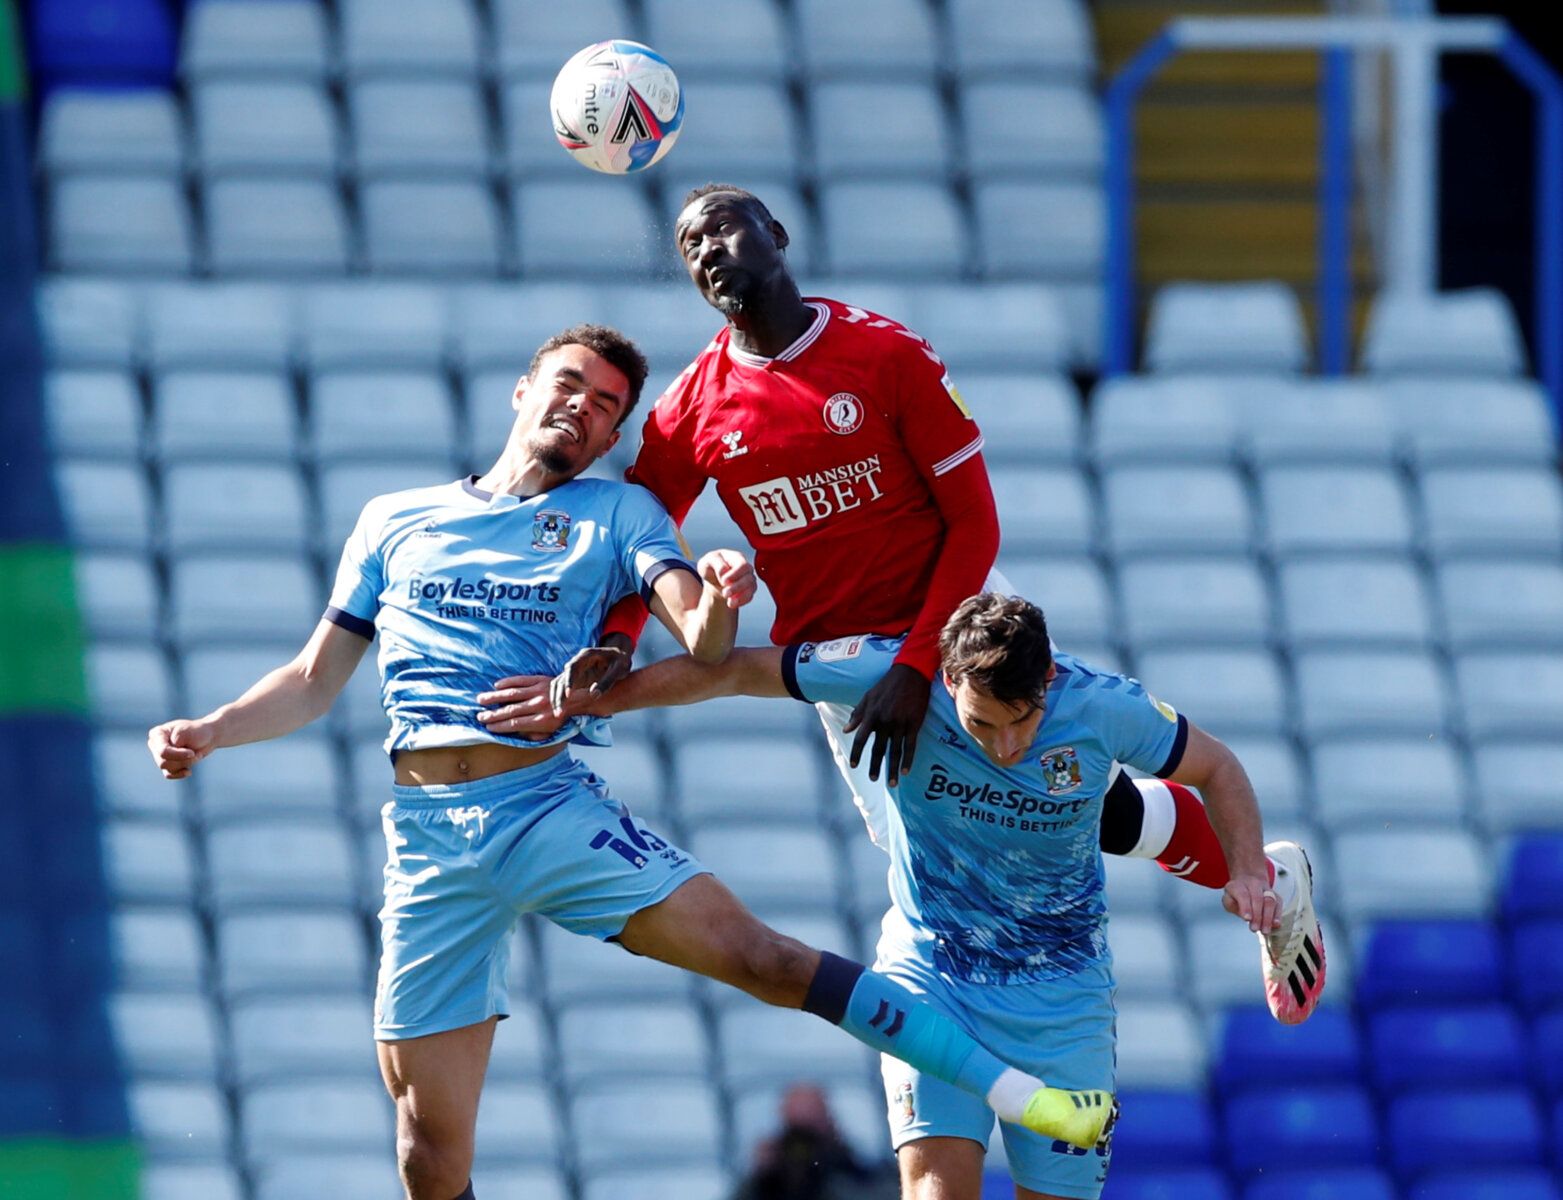 Soccer Football - Championship - Coventry City v Bristol City - St Andrew's, Birmingham, Britain - April 5, 2021  Bristol City's Famara Diedhiou in action with Coventry City's Josh Pask and Matty James  Action Images/Andrew Boyers  EDITORIAL USE ONLY. No use with unauthorized audio, video, data, fixture lists, club/league logos or 